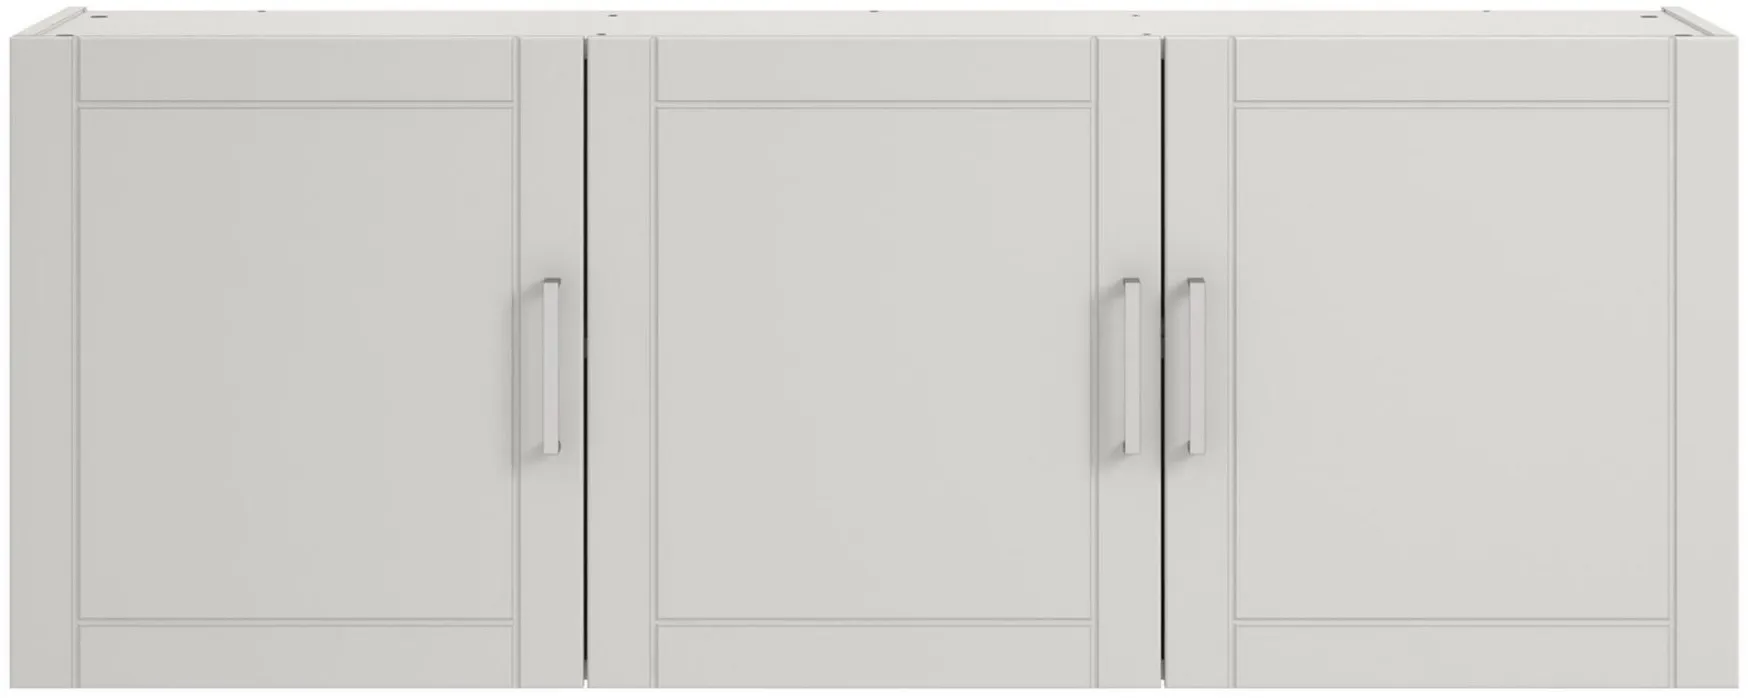 Callahan Wall-Mounted Cabinet in White by DOREL HOME FURNISHINGS